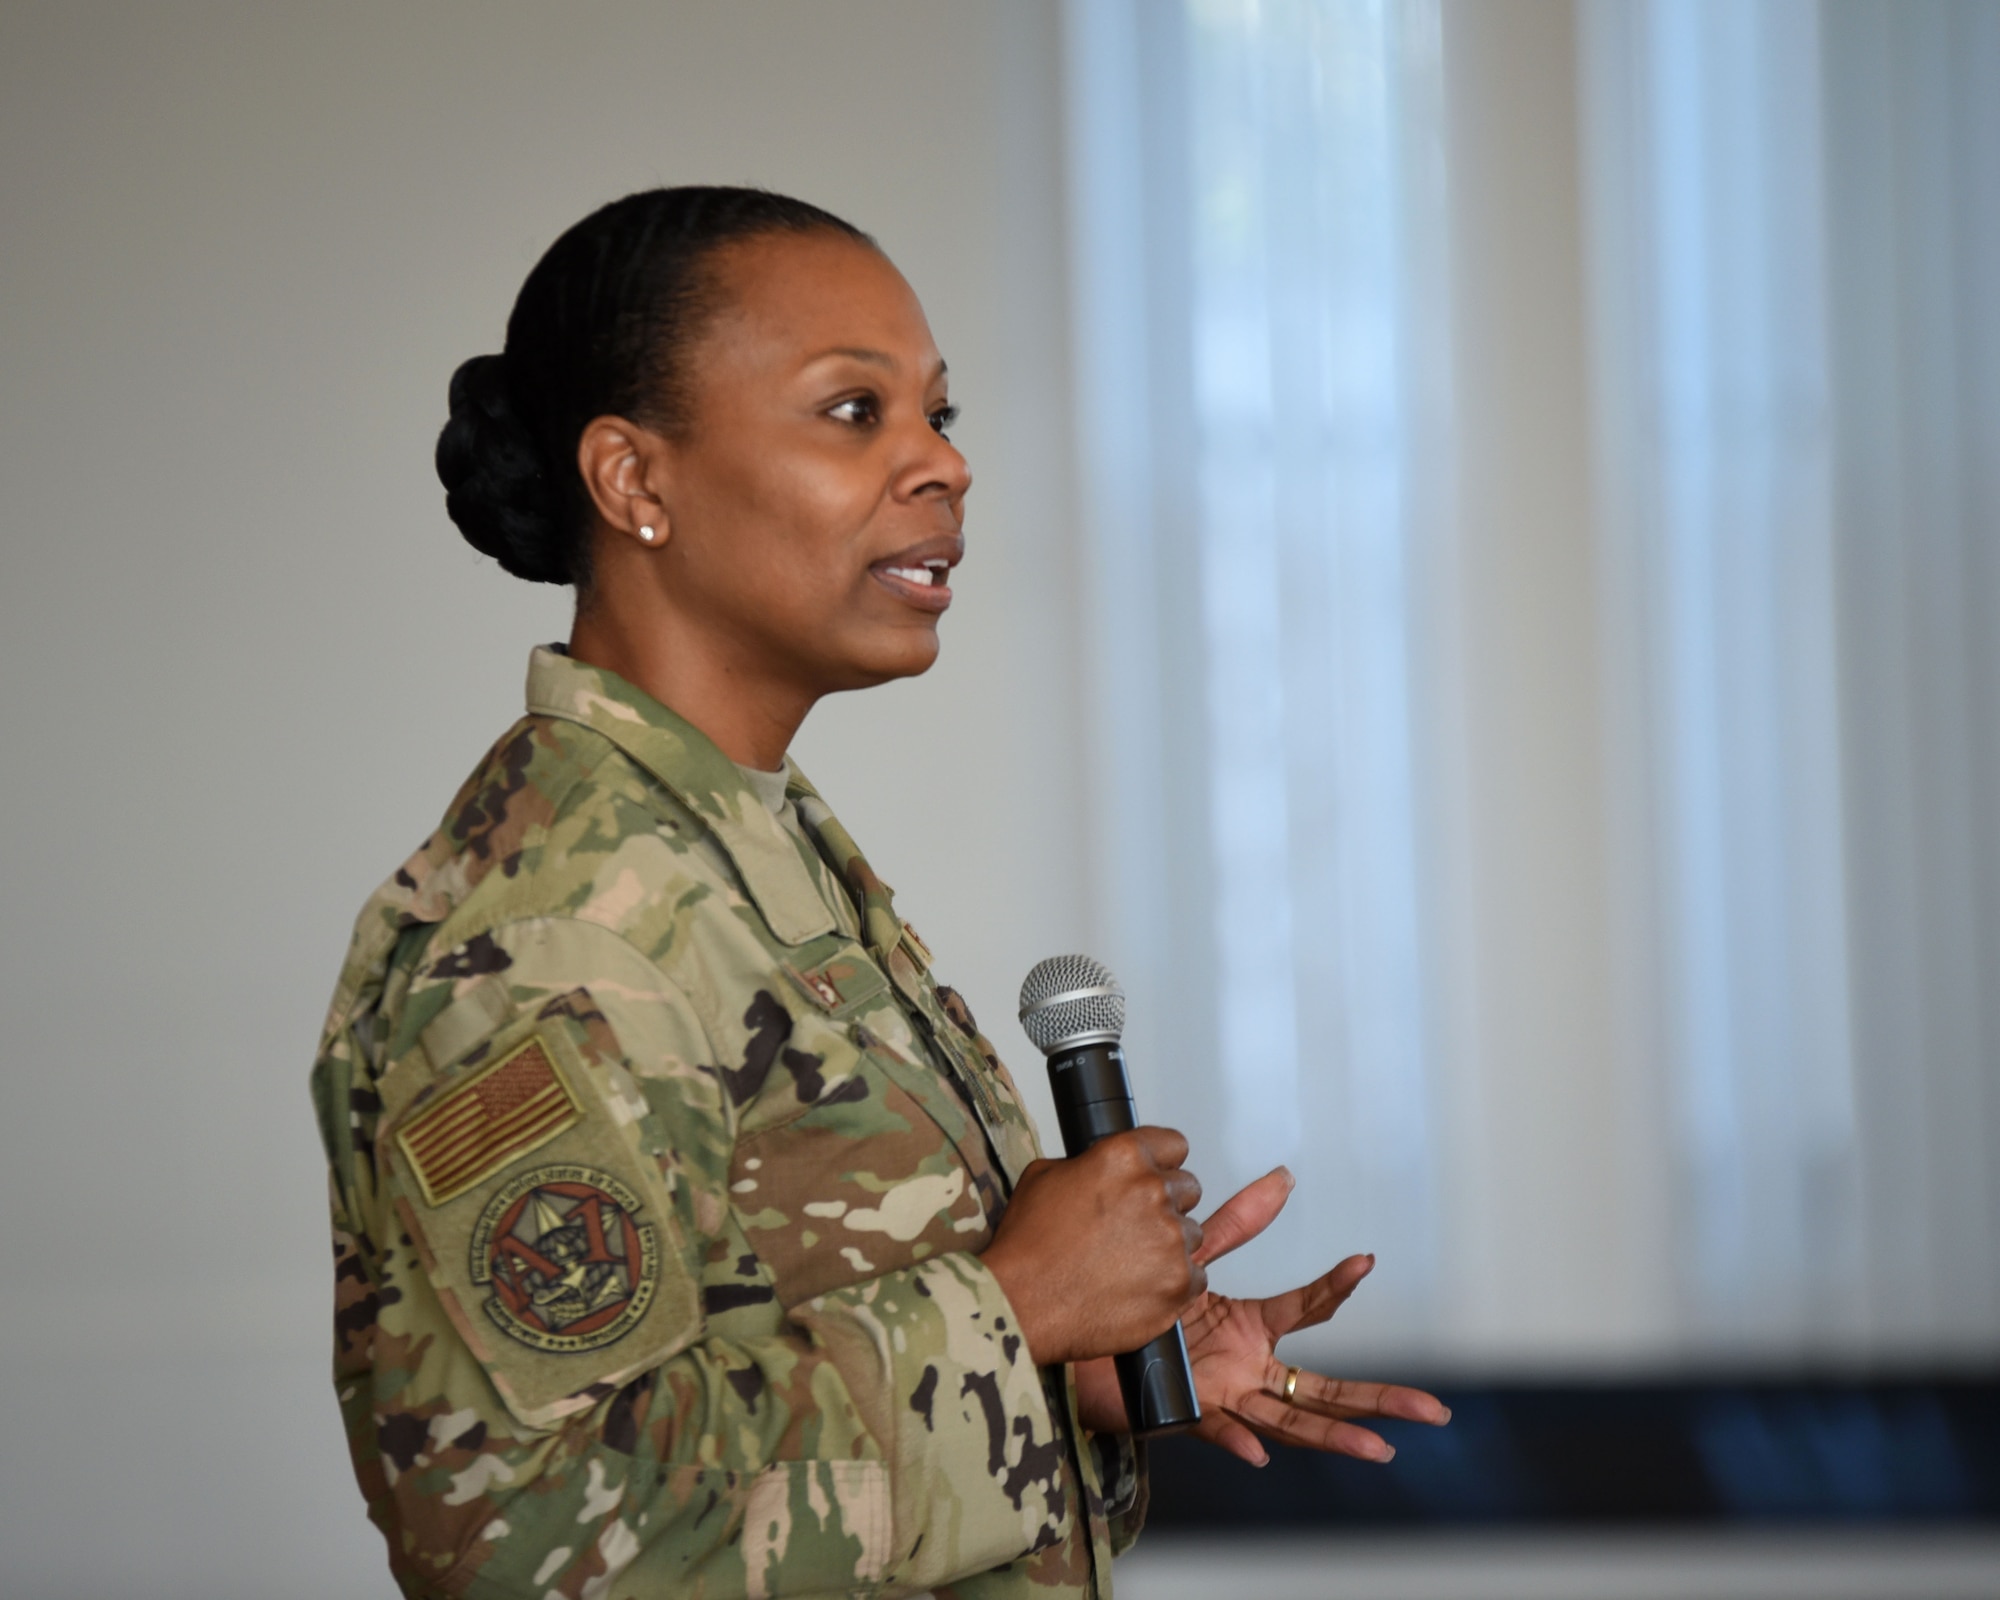 U.S. Air Force Chief Master Sgt. Janna Wesley, Chief of Military Force Management, speaks with 70th Intelligence, Surveillance and Reconnaissance Wing Airmen during a diversity and inclusion briefing at Fort George G. Meade, Maryland, Aug. 6, 2019. Wesley delivered a powerful speech and discussed overcoming barriers, as well as helping Airmen identify unconscious biases. (U.S. Air Force photo by Airman 1st Class Madison Frazier)